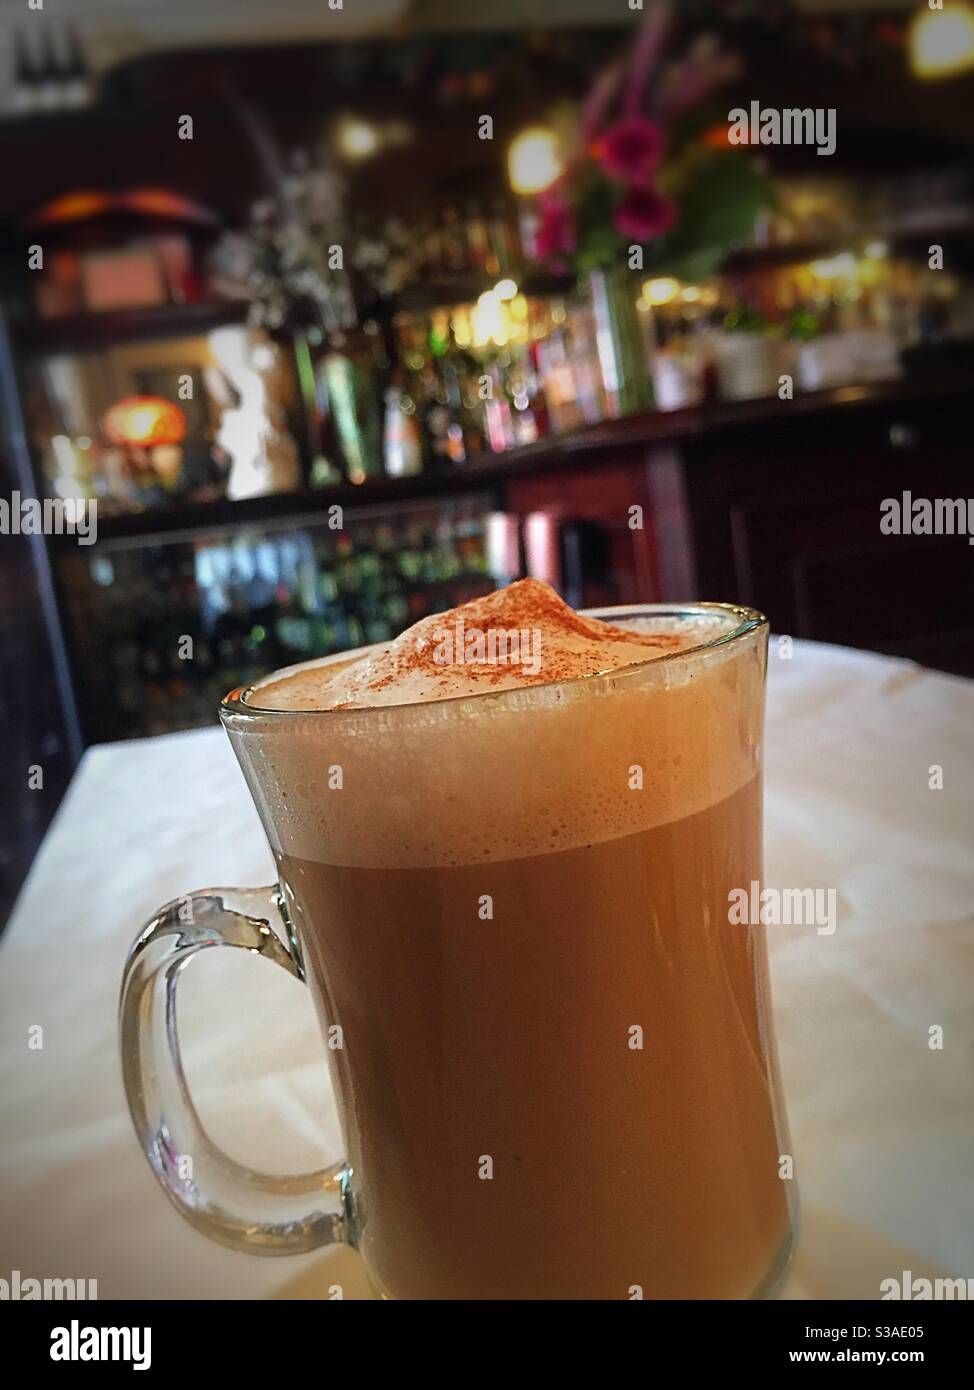 Cappuccino in a clear glass mug served at an upscale French bistro in Soho, New York City, USA Stock Photo